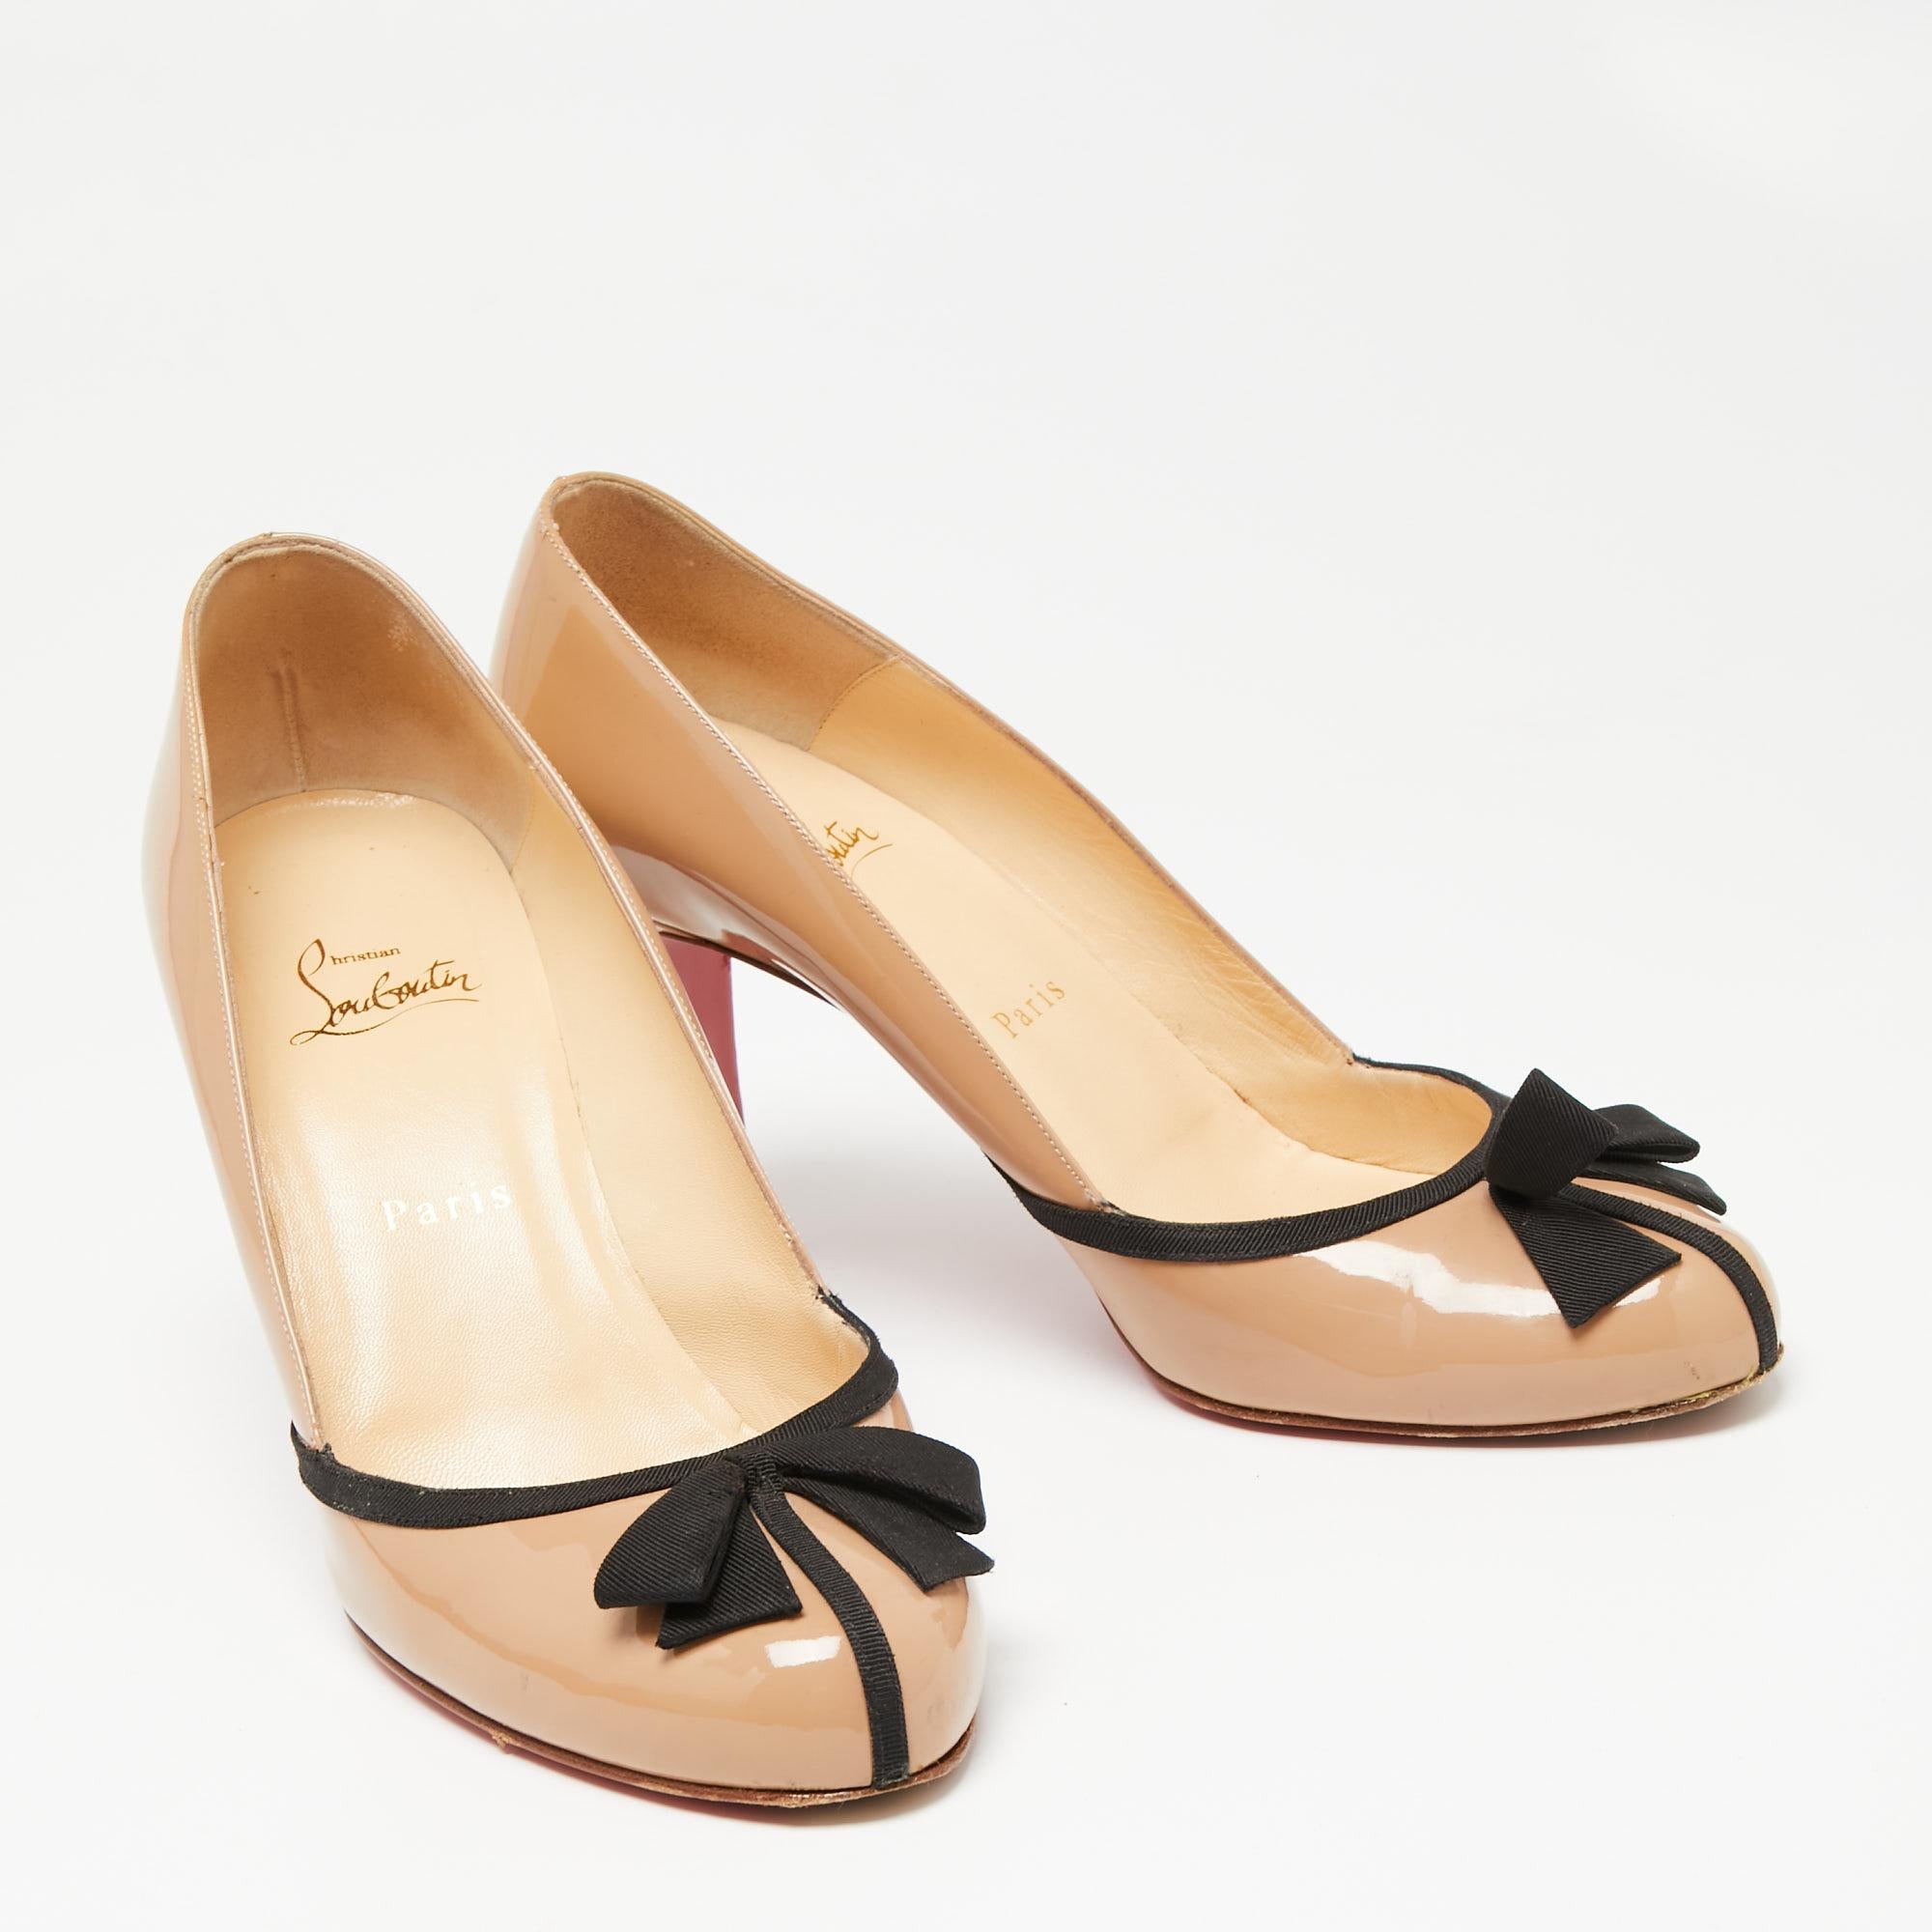 Christian Louboutin Beige Patent Leather Lavalliere Pumps Size 39.5 For Sale 1